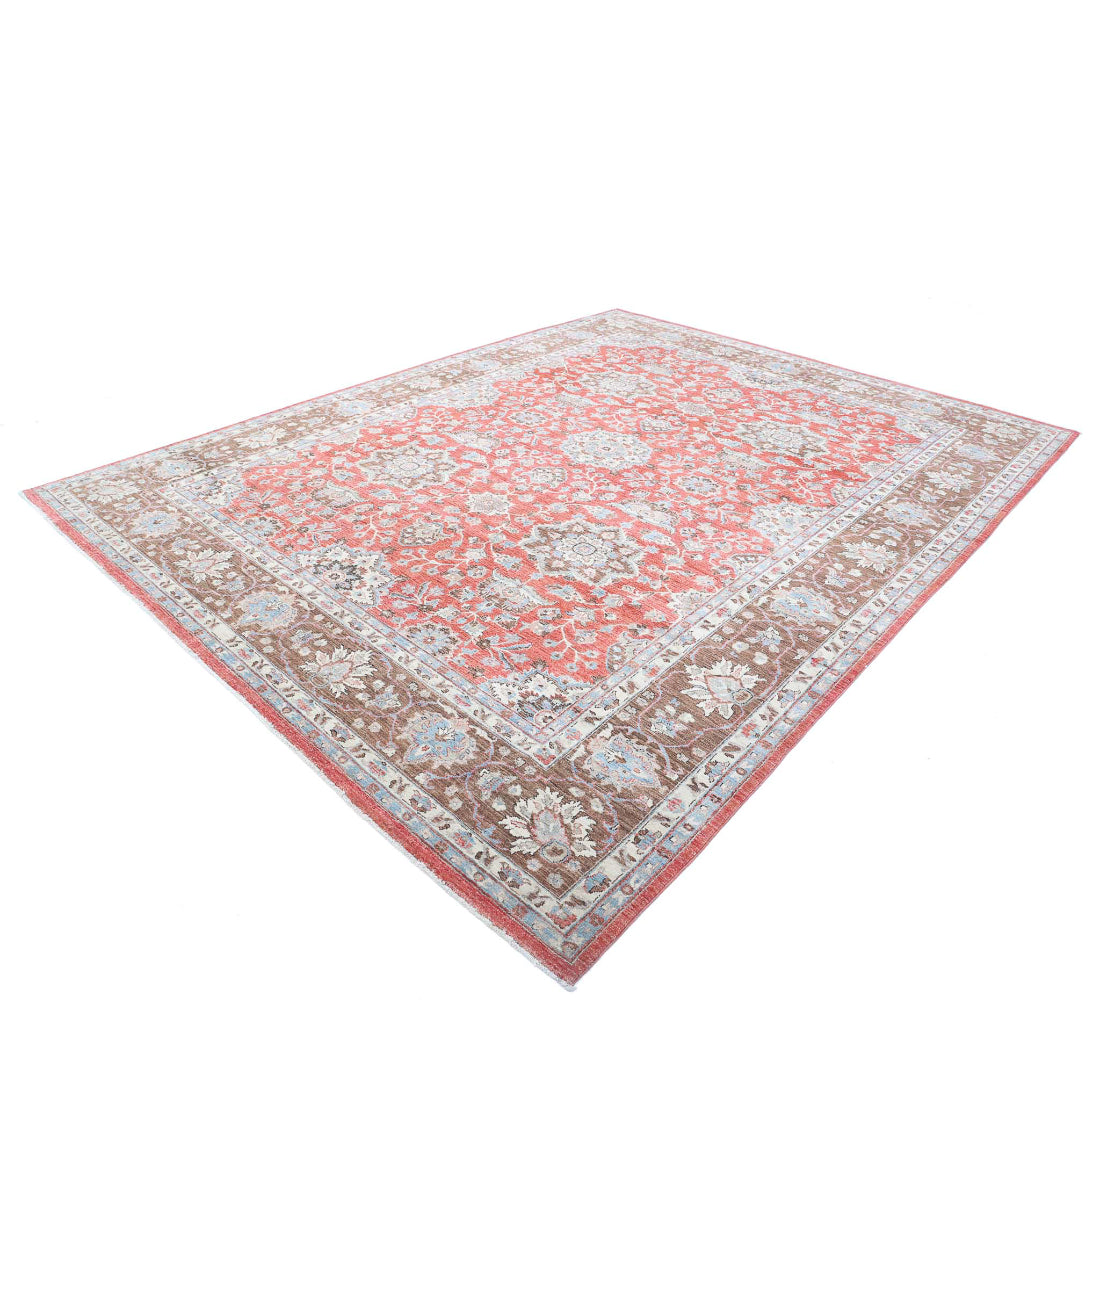 Ziegler 9'6'' X 12'3'' Hand-Knotted Wool Rug 9'6'' x 12'3'' (285 X 368) / Rust / Brown